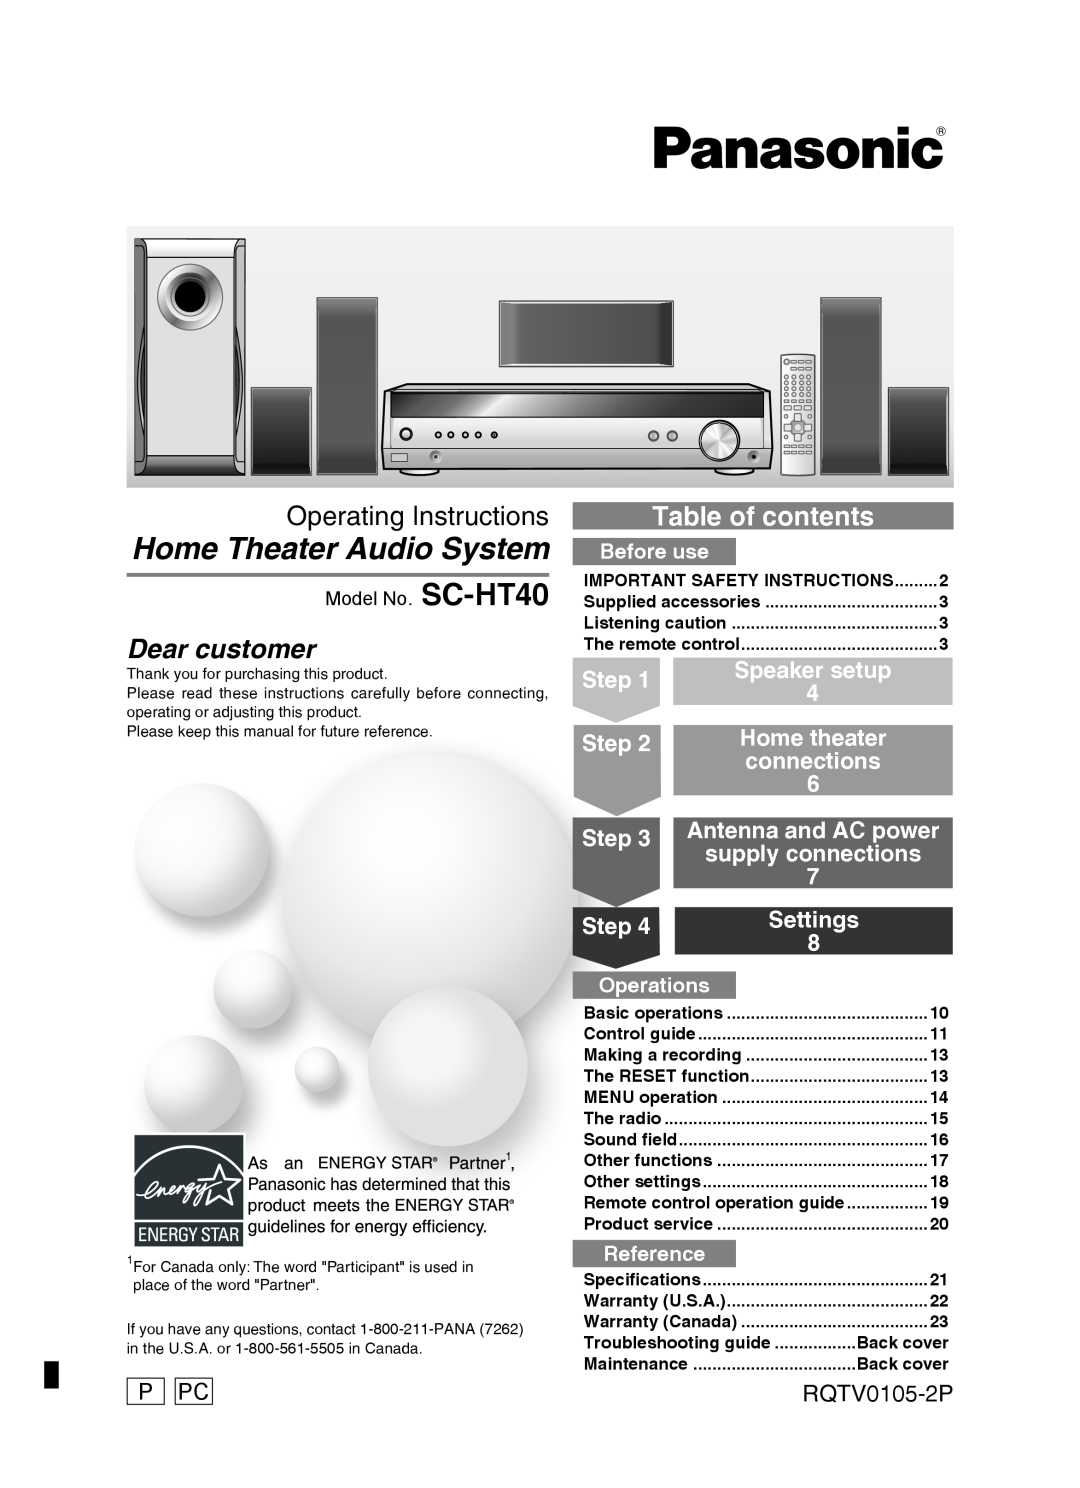 Panasonic specifications Operating Instructions, Step, P Pc, RQTV0105-2P, Model No. SC-HT40, Home Theater Audio System 